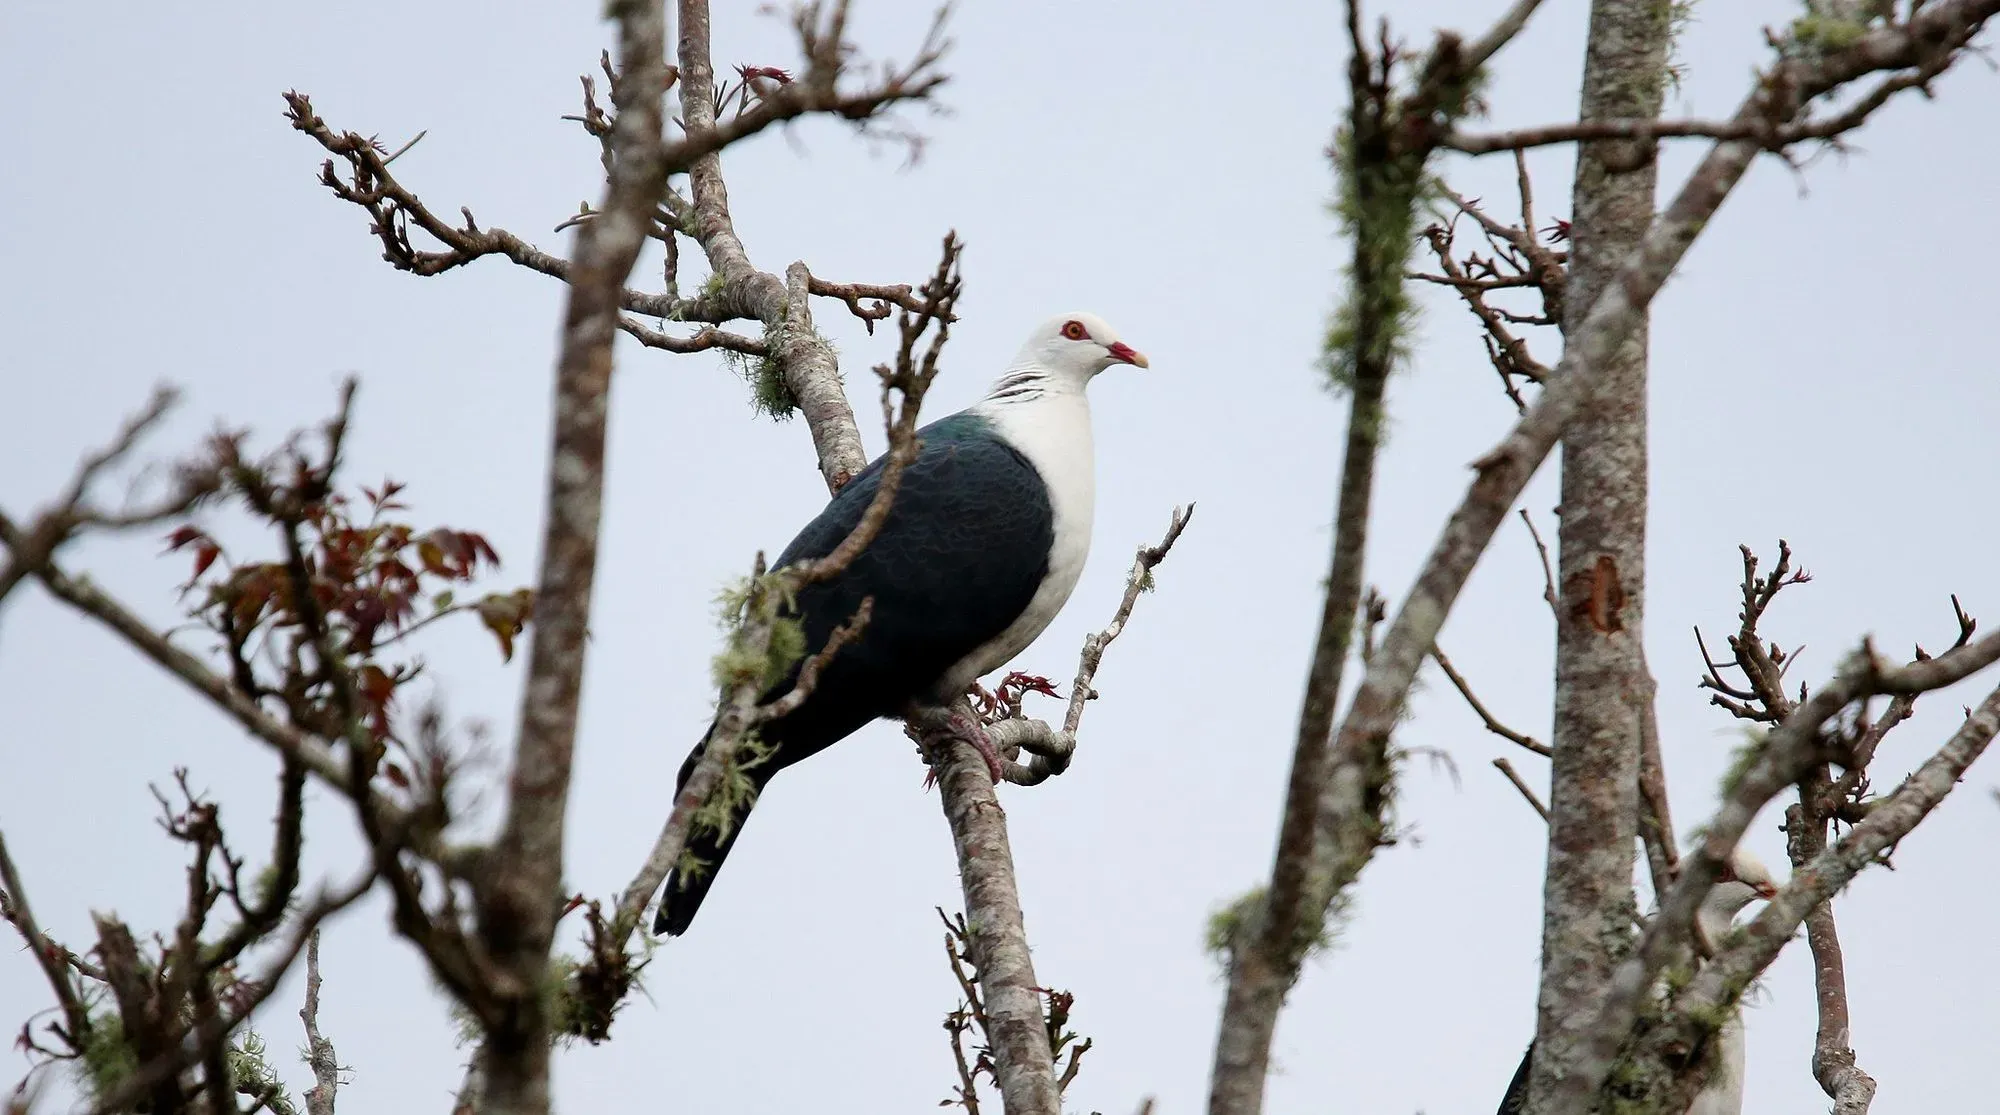 White-headed pigeons have a pinkish-red eye-ring.